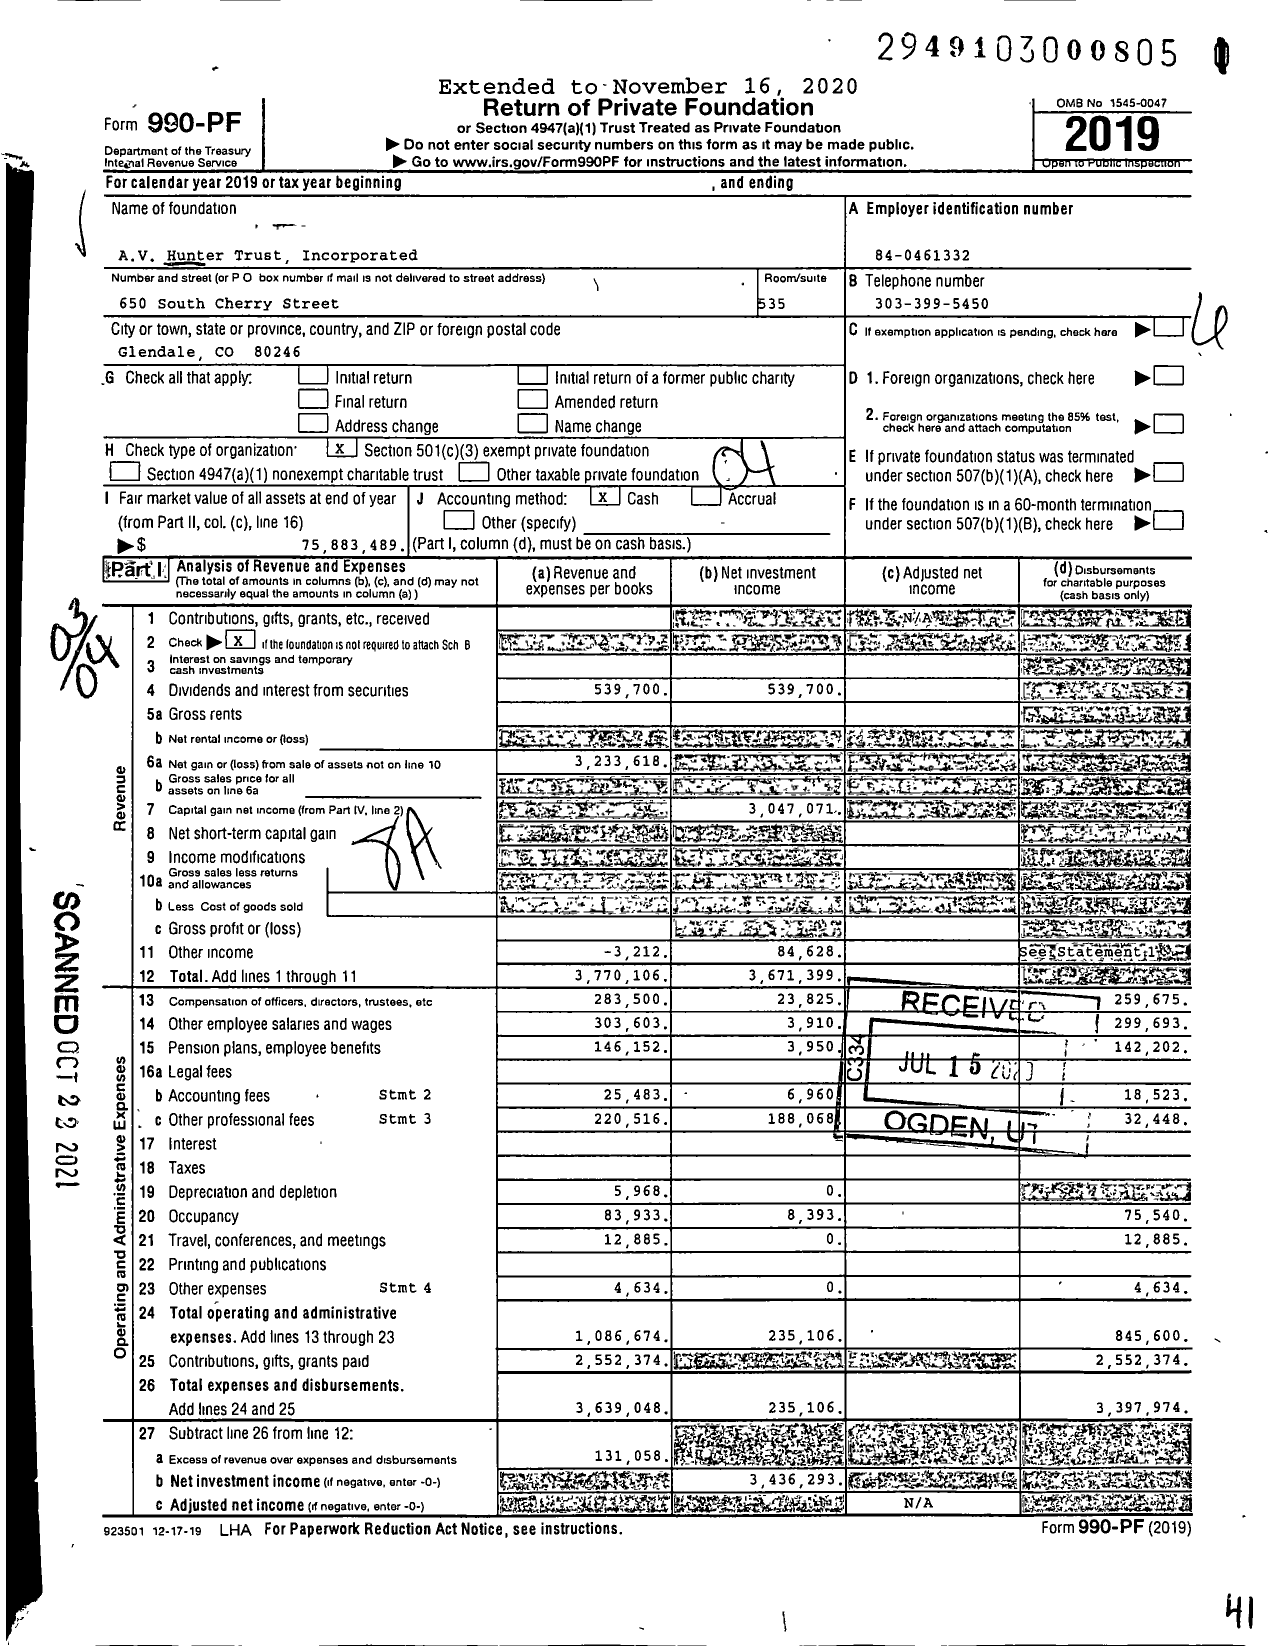 Image of first page of 2019 Form 990PF for AV Hunter Trust Incorporated